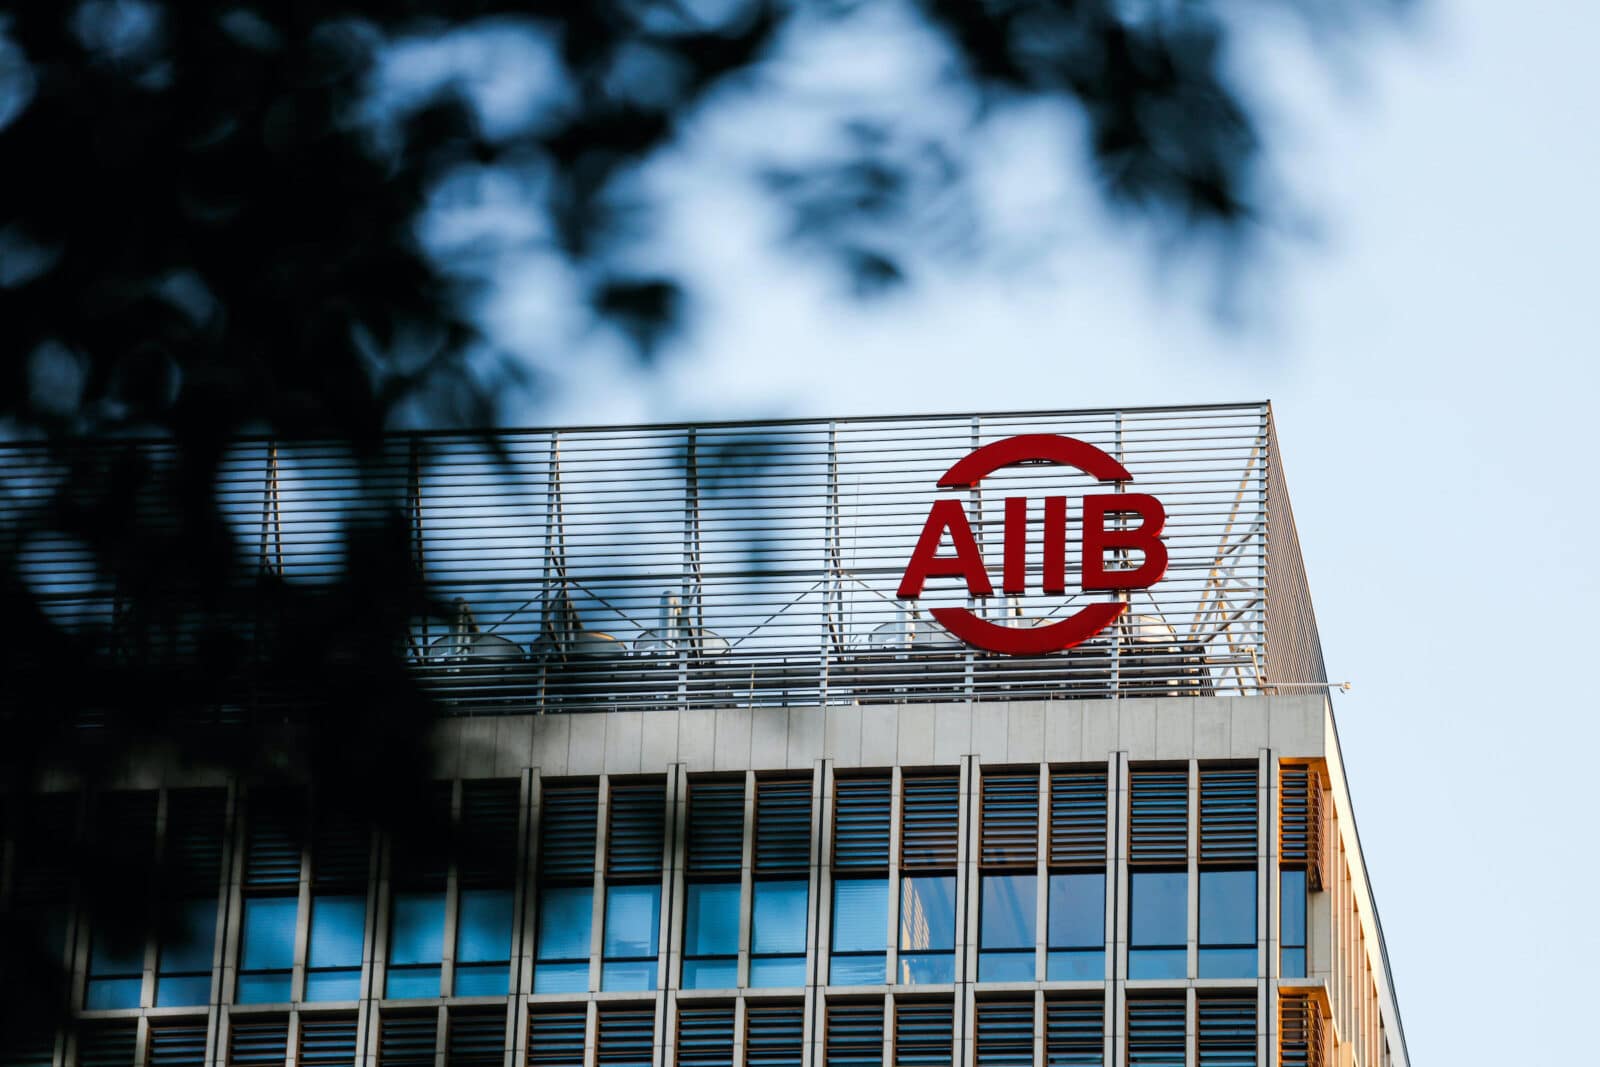 AIIB Approves $250 Million Loan to Assist Pakistan Against COVID-19